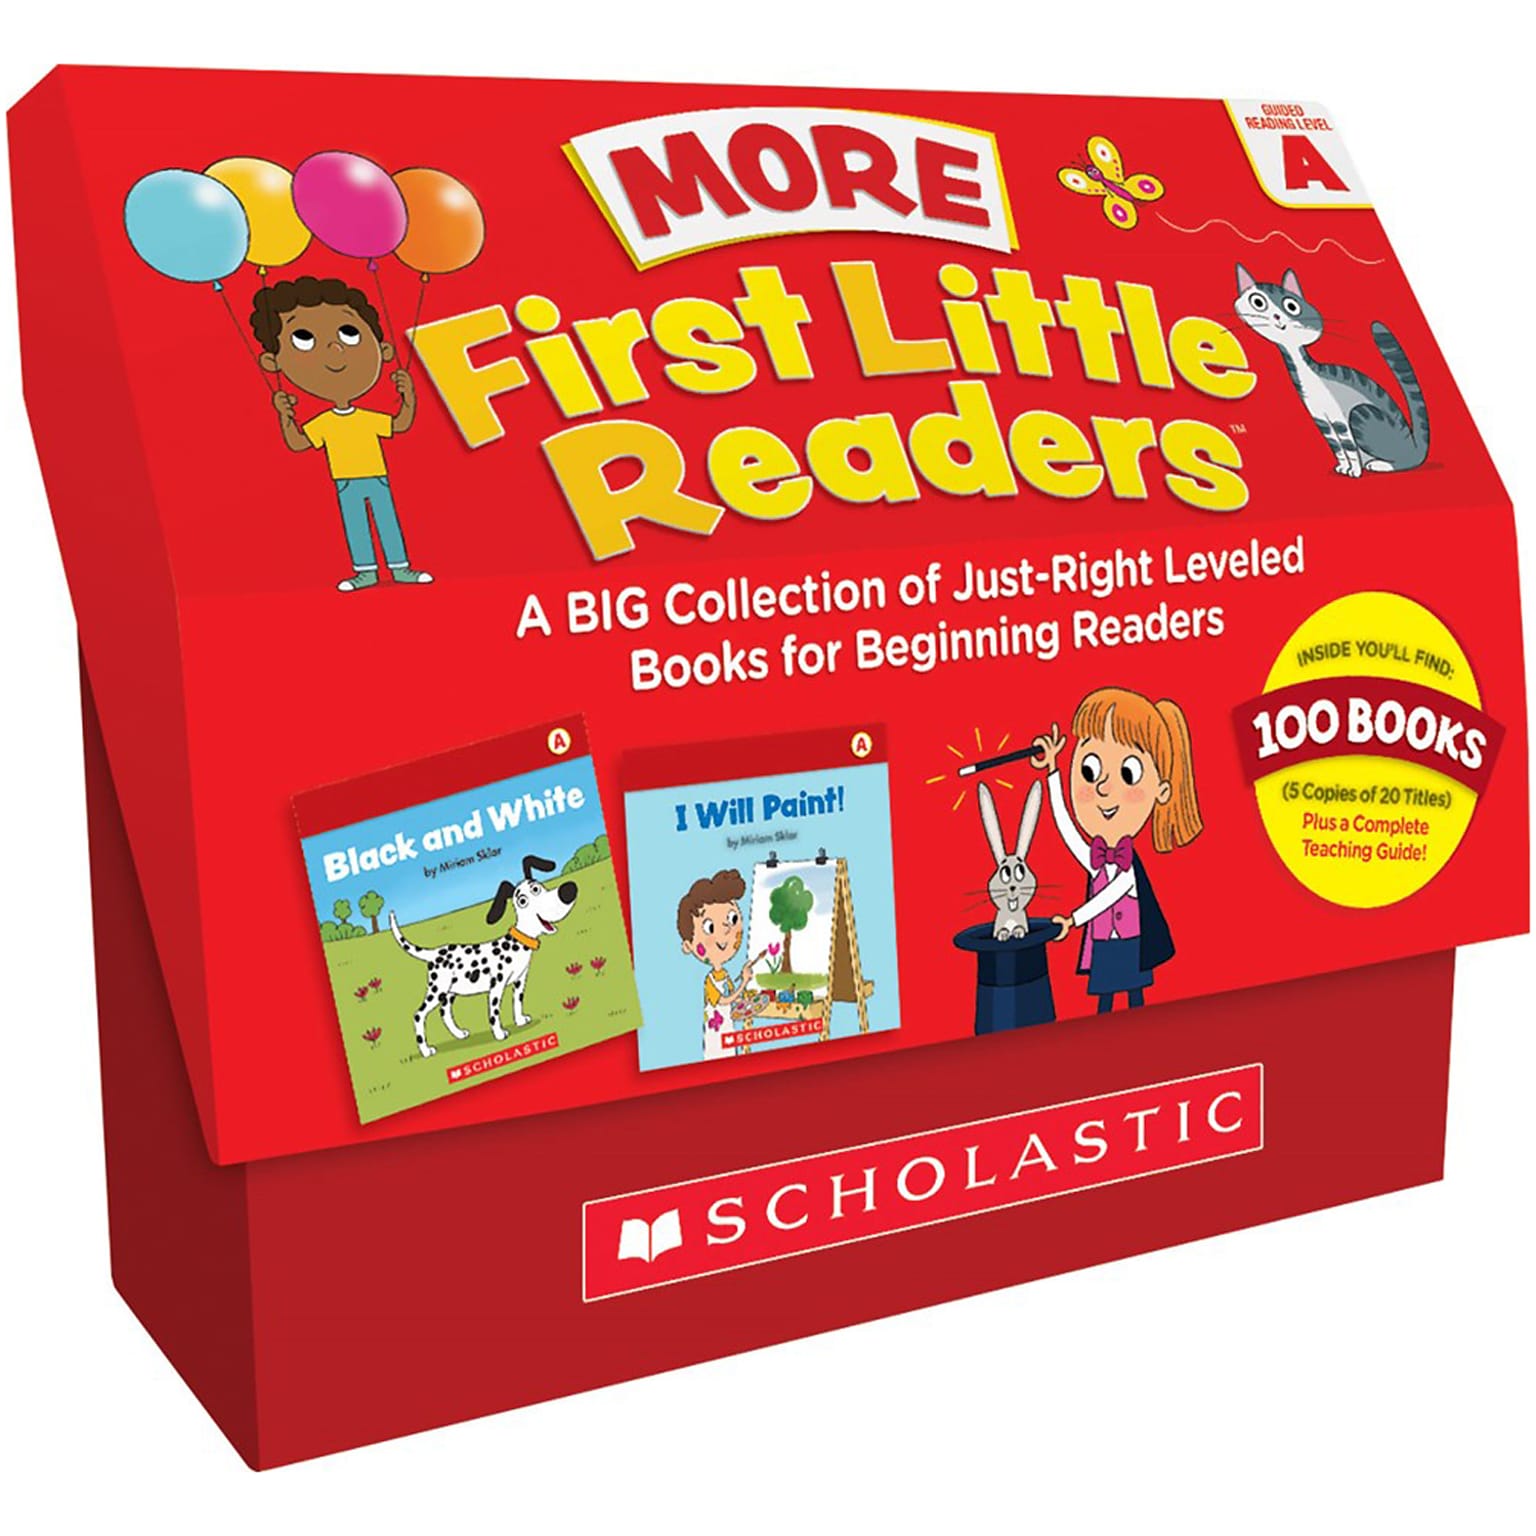 First Little Readers: More Guided Reading Level A Books (Classroom Set), 20 Titles, 5 Copies Per Title (9781338717389)